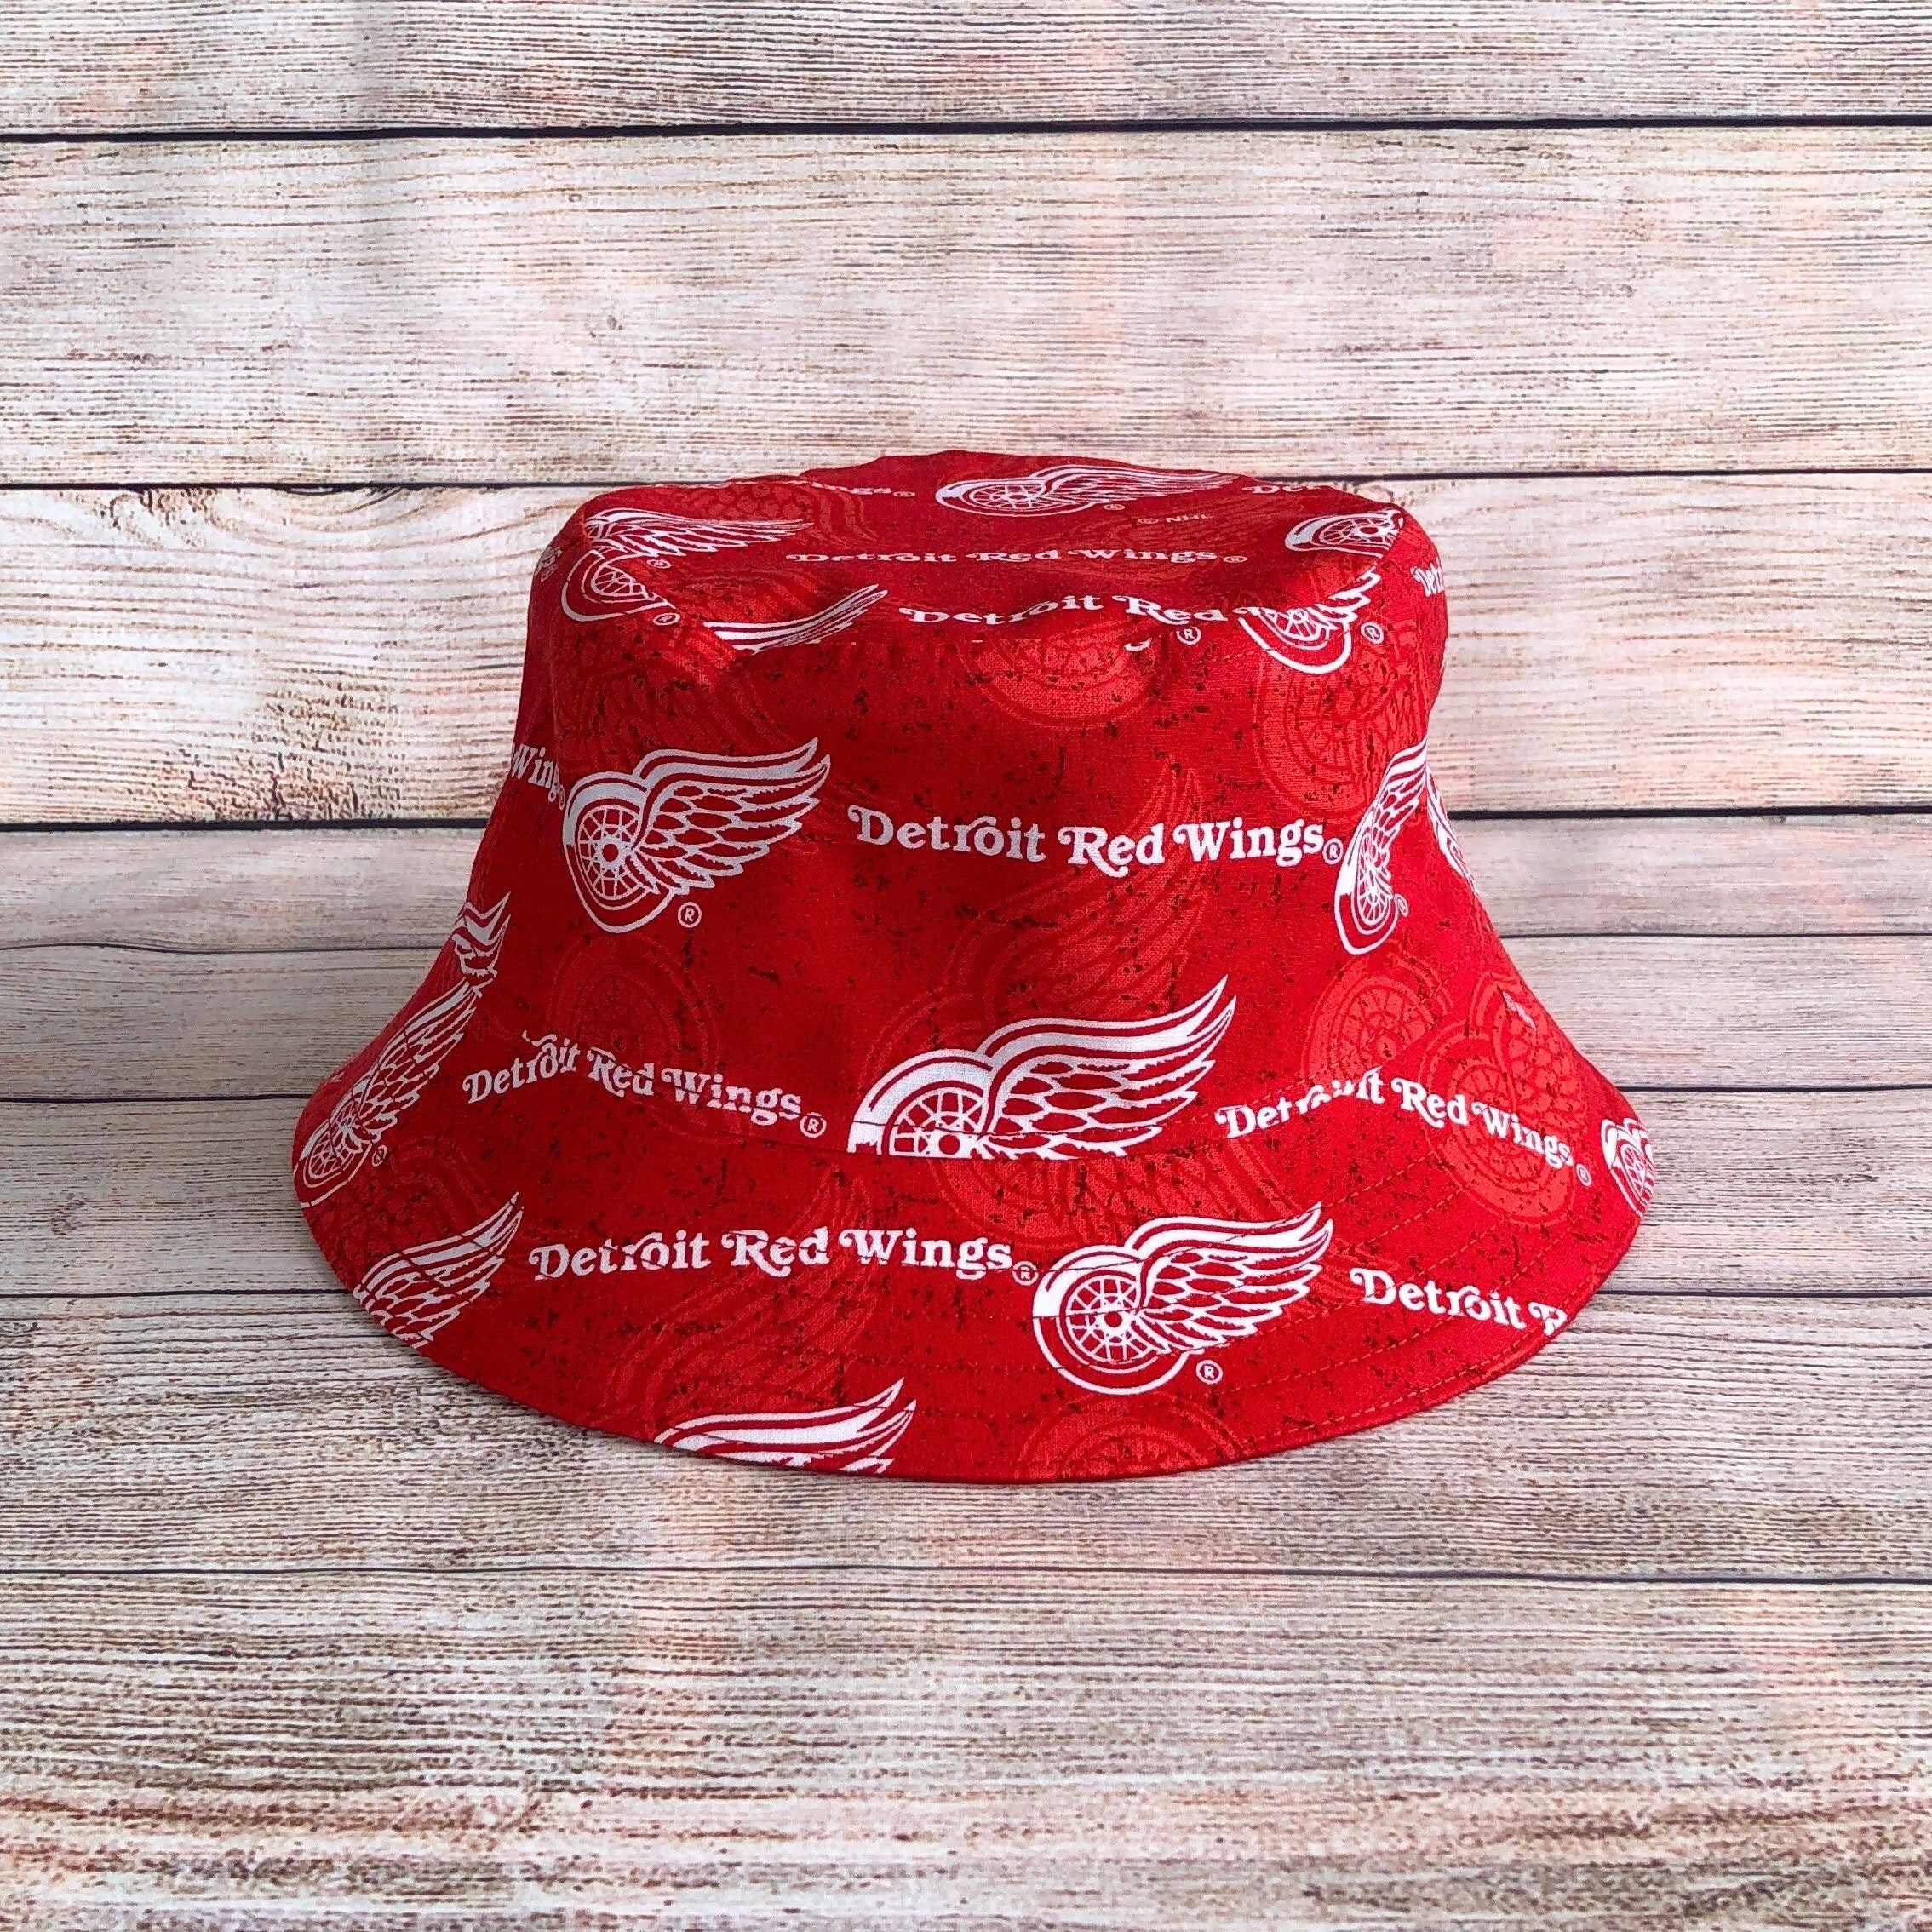 Detroit Red Wings & Octopus Bucket Hat, Adult Size Large, fishing hat, sun  hat, floppy hat, hockey, handmade from licensed fabric